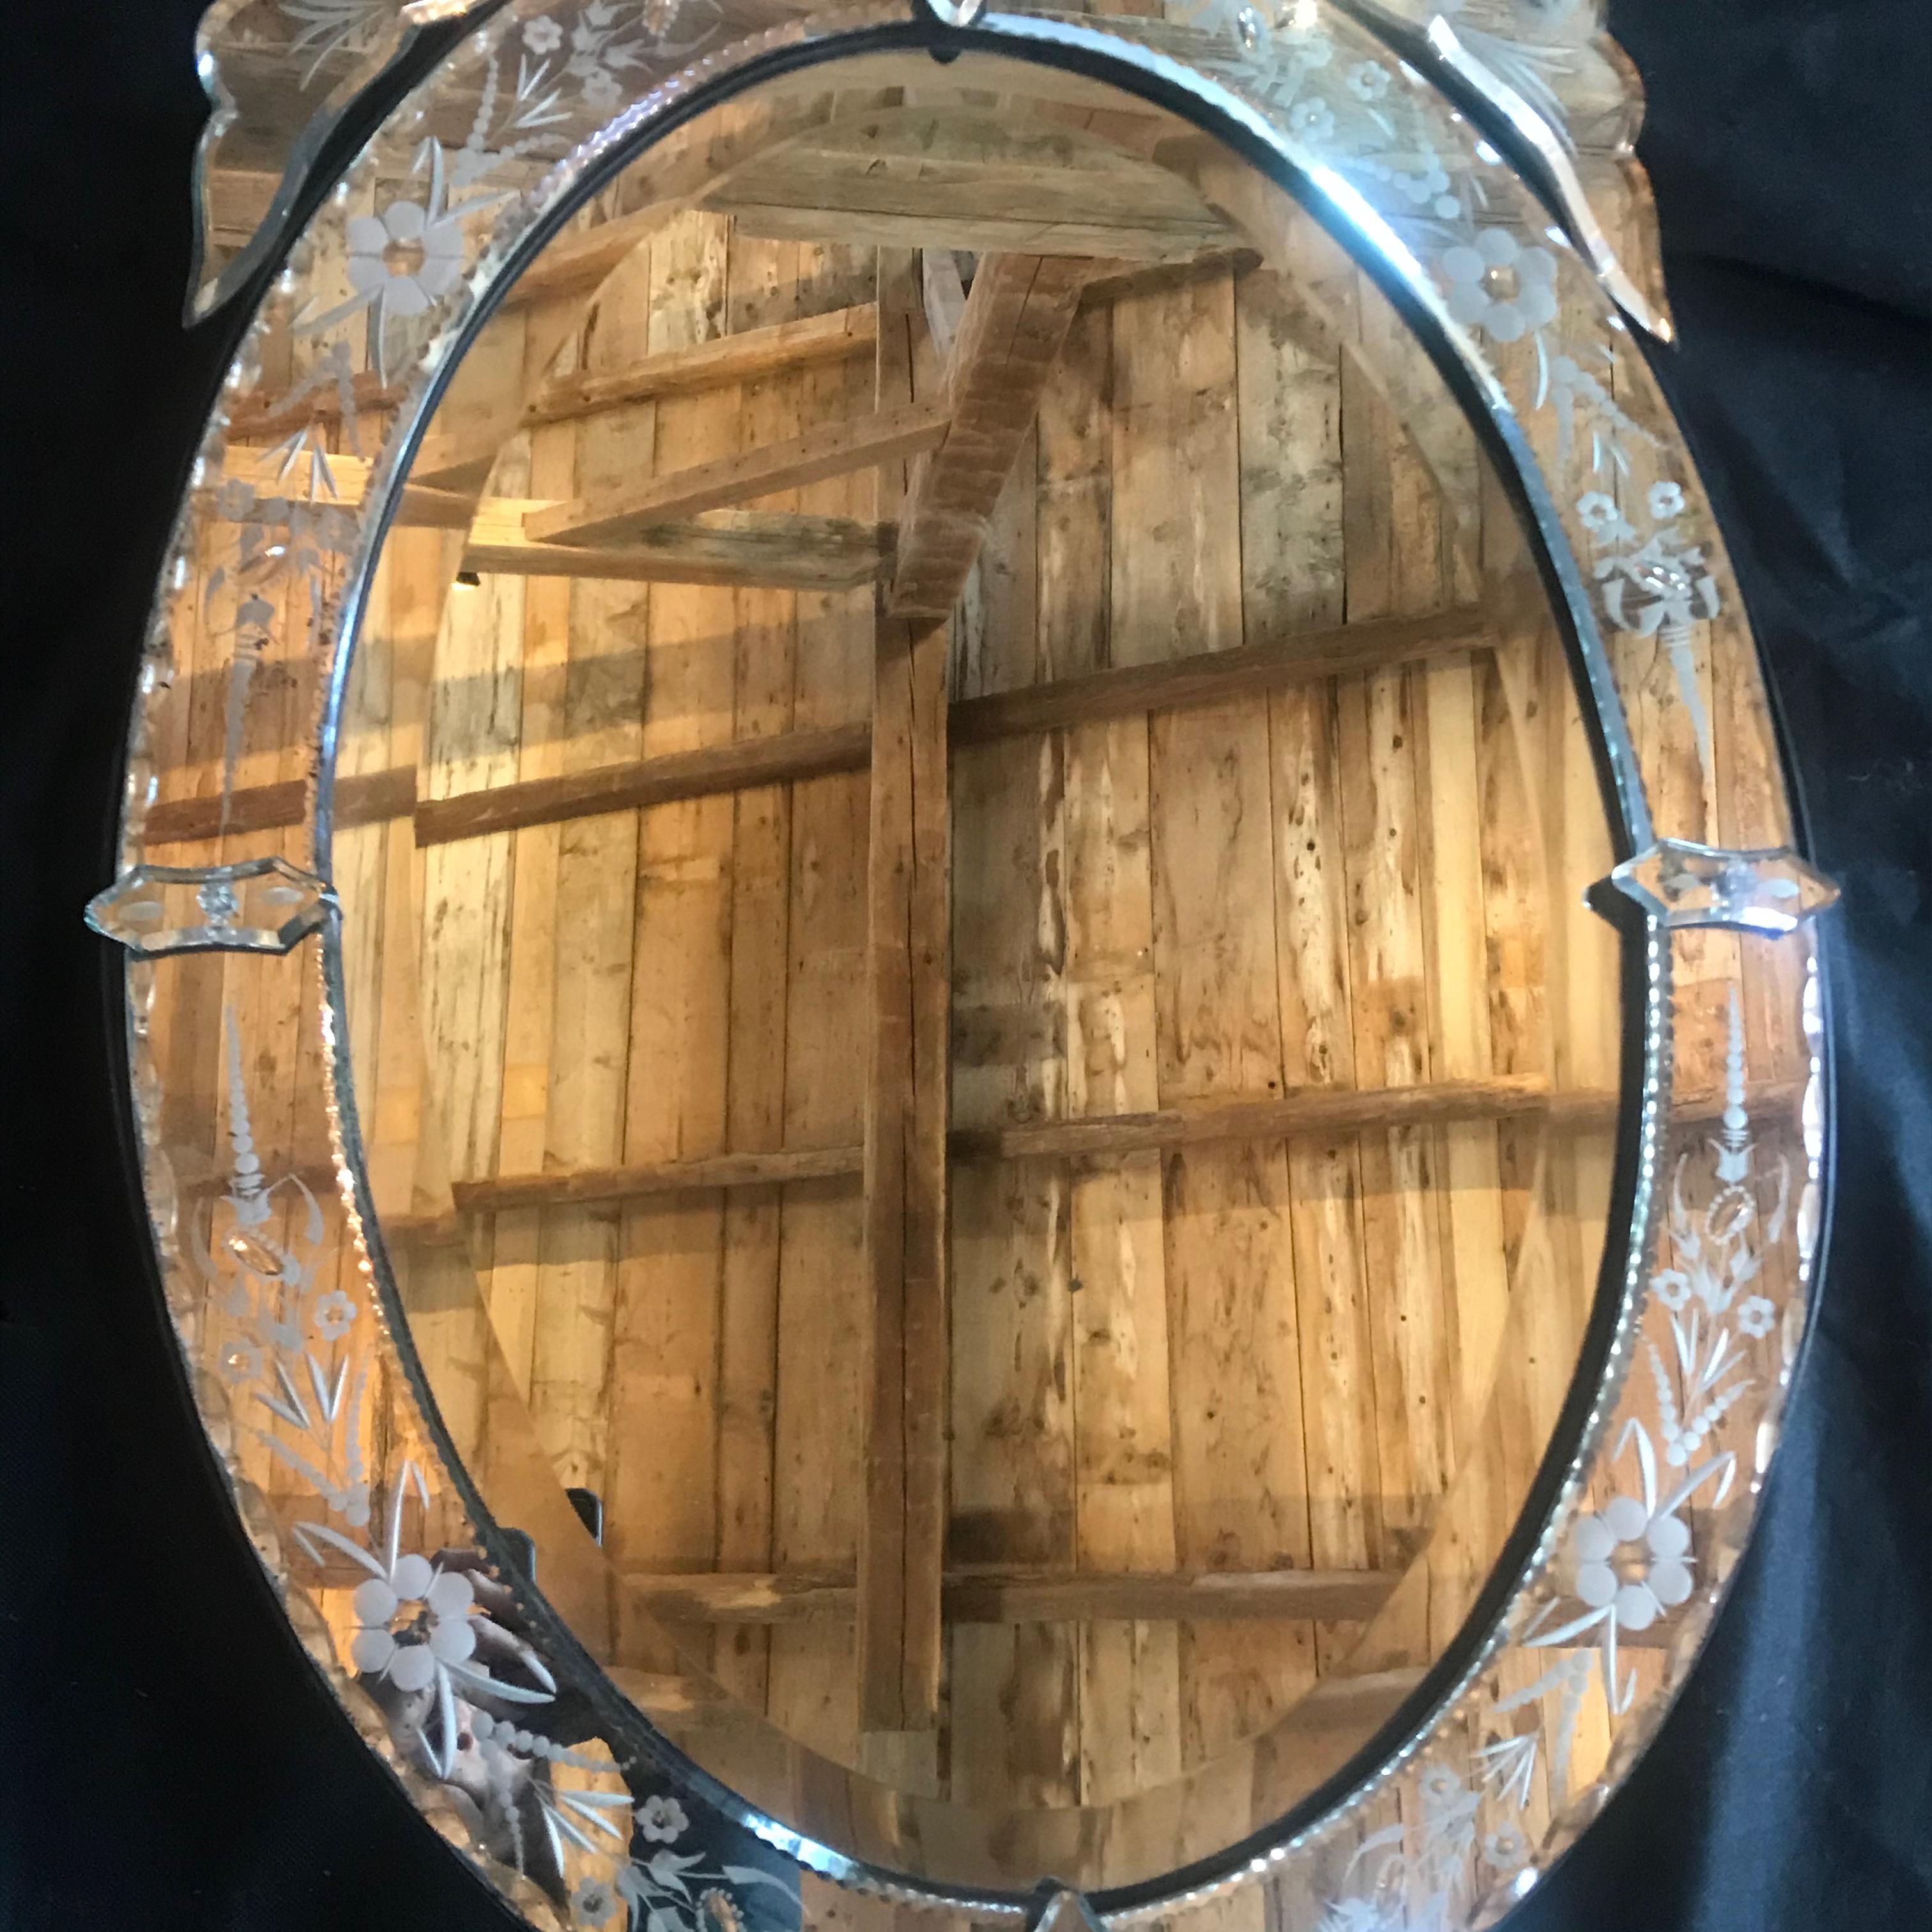 A fabulously decorated vintage Venetian glass mirror having sumptuous and beautiful vintage facet cut mirror from 1940s France and with an elegant oval design. The mirror frame is richly ornamented with flower borders and more. The mirror has a